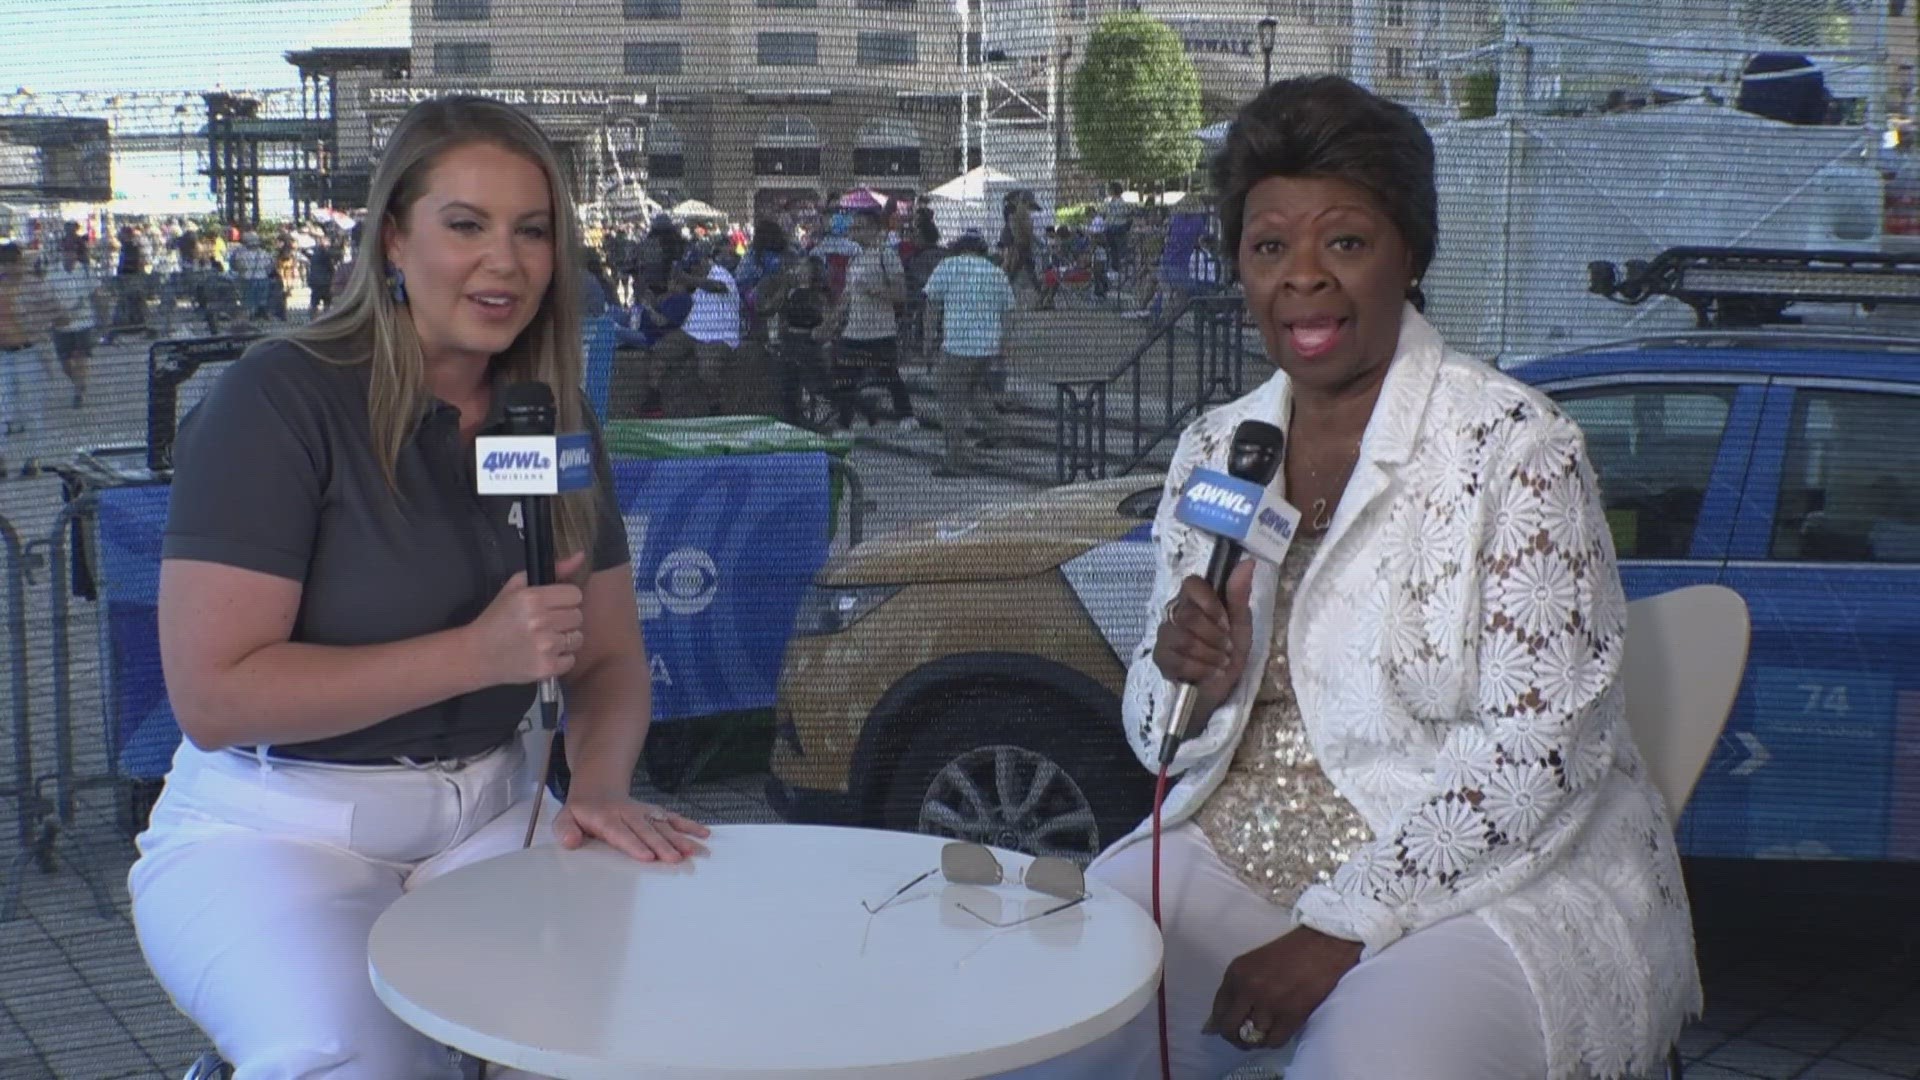 Irma Thomas sat down at the WWL Louisiana Love stage to talk about her 50 year career and more.